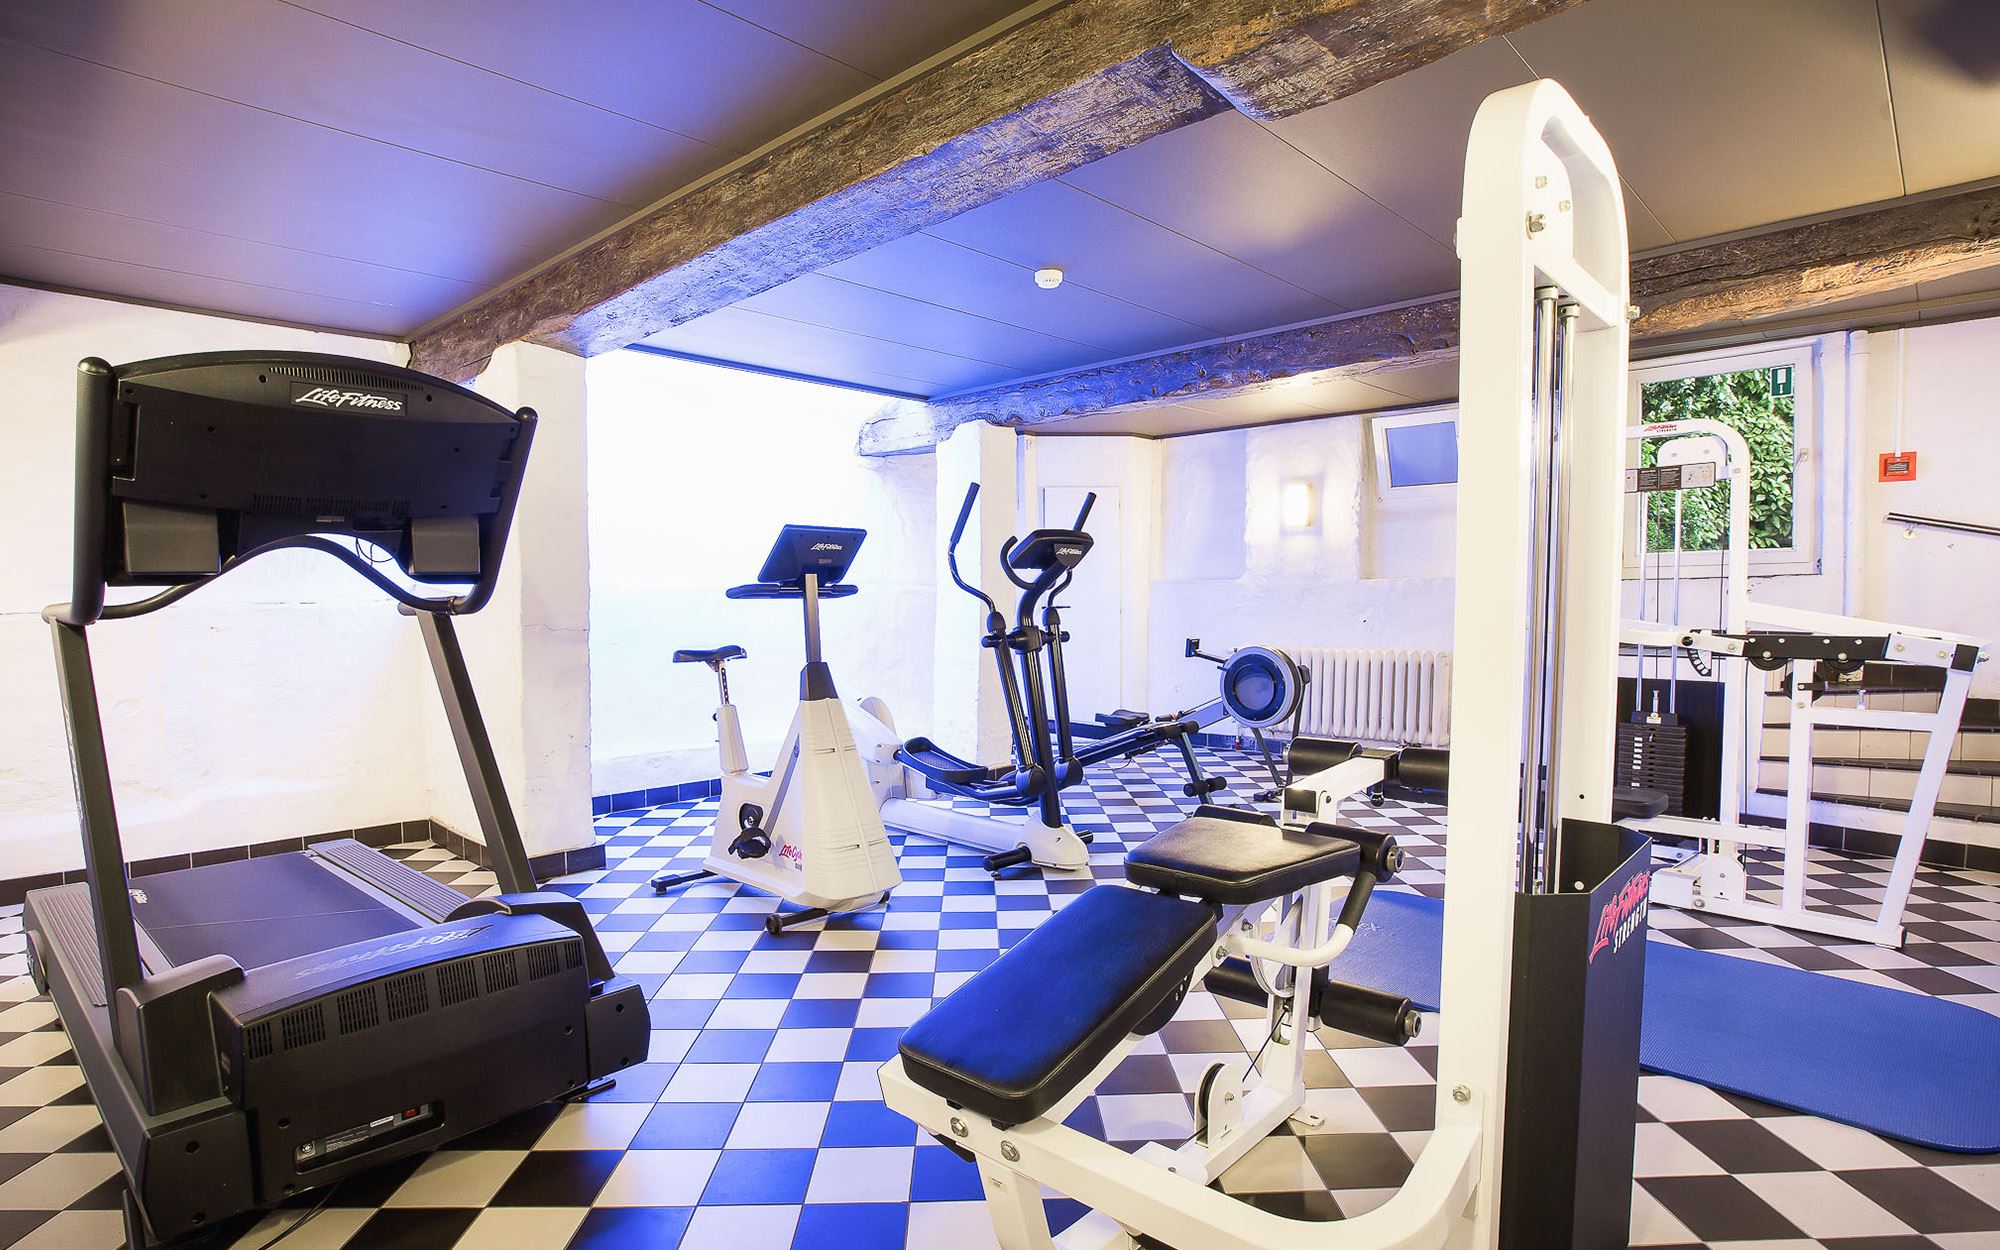 Hotel Navarra Bruges Exercise In The Fitness Room